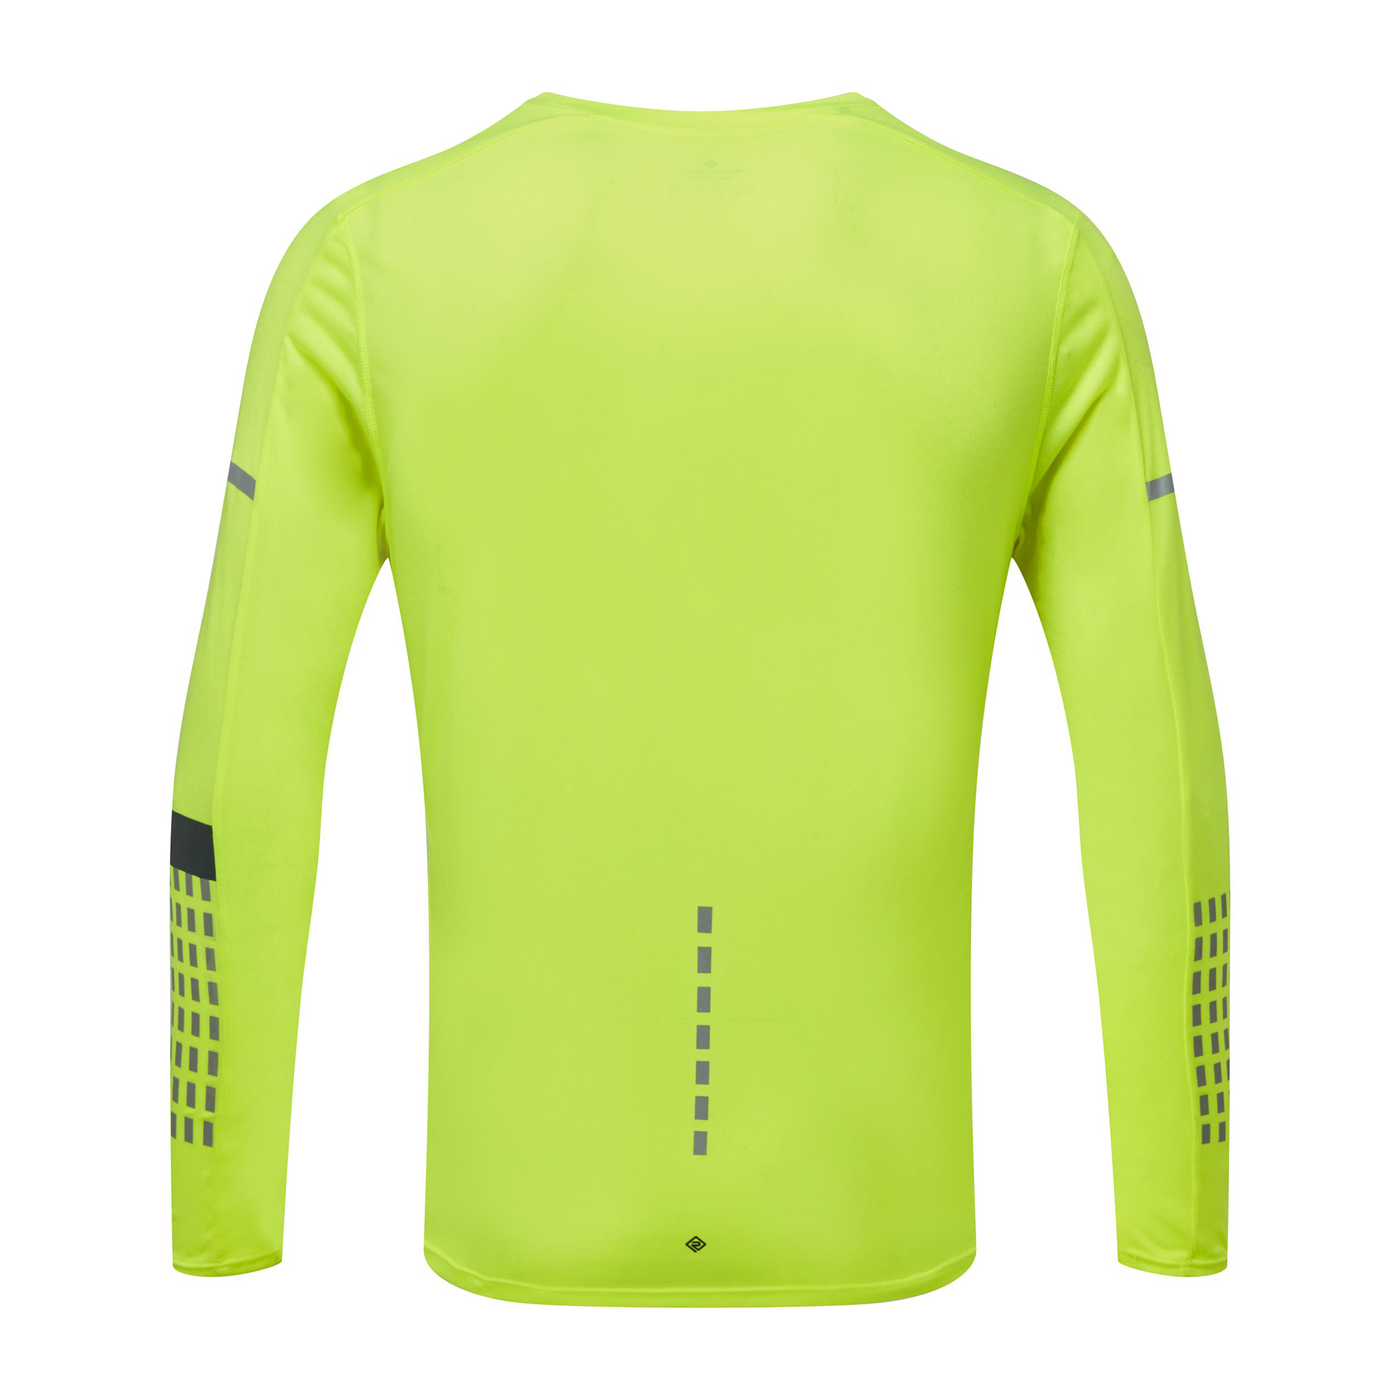 RonHill Mens Tech Afterhours L/S Tee - Fluo Yellow/Charcoal/Reflect